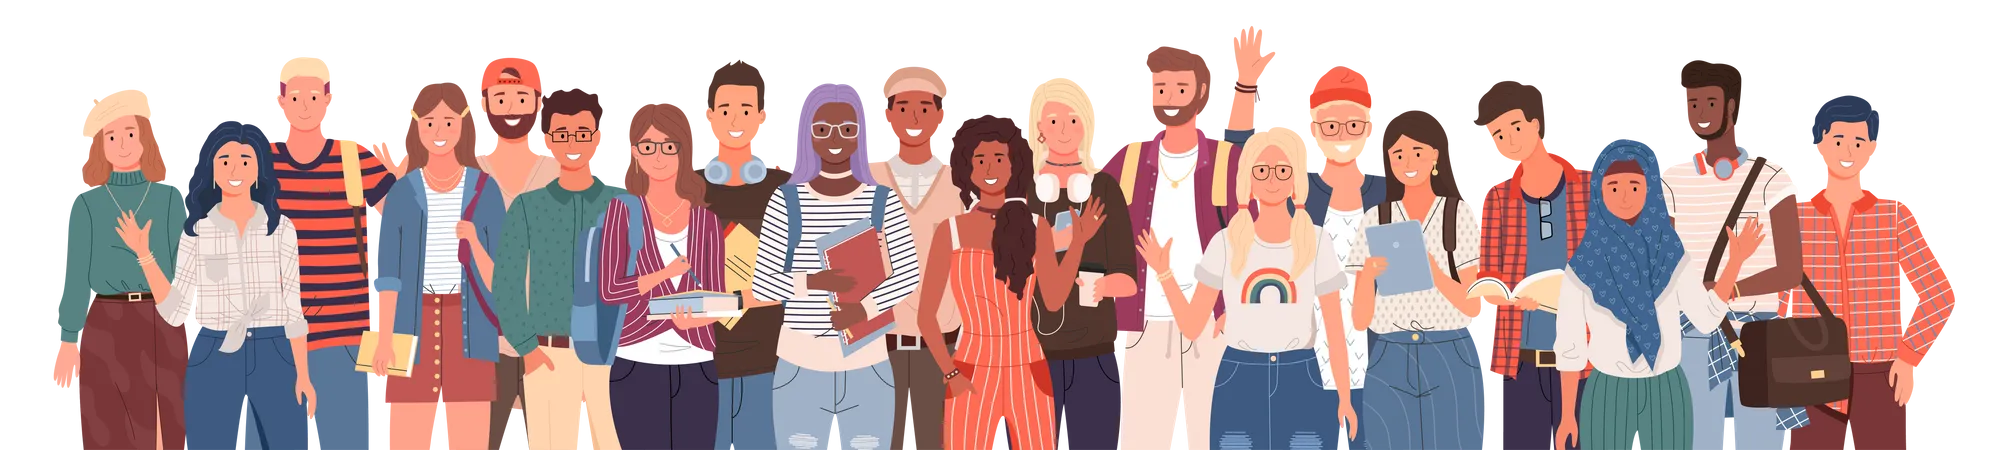 Group of diverse students studying together  Illustration